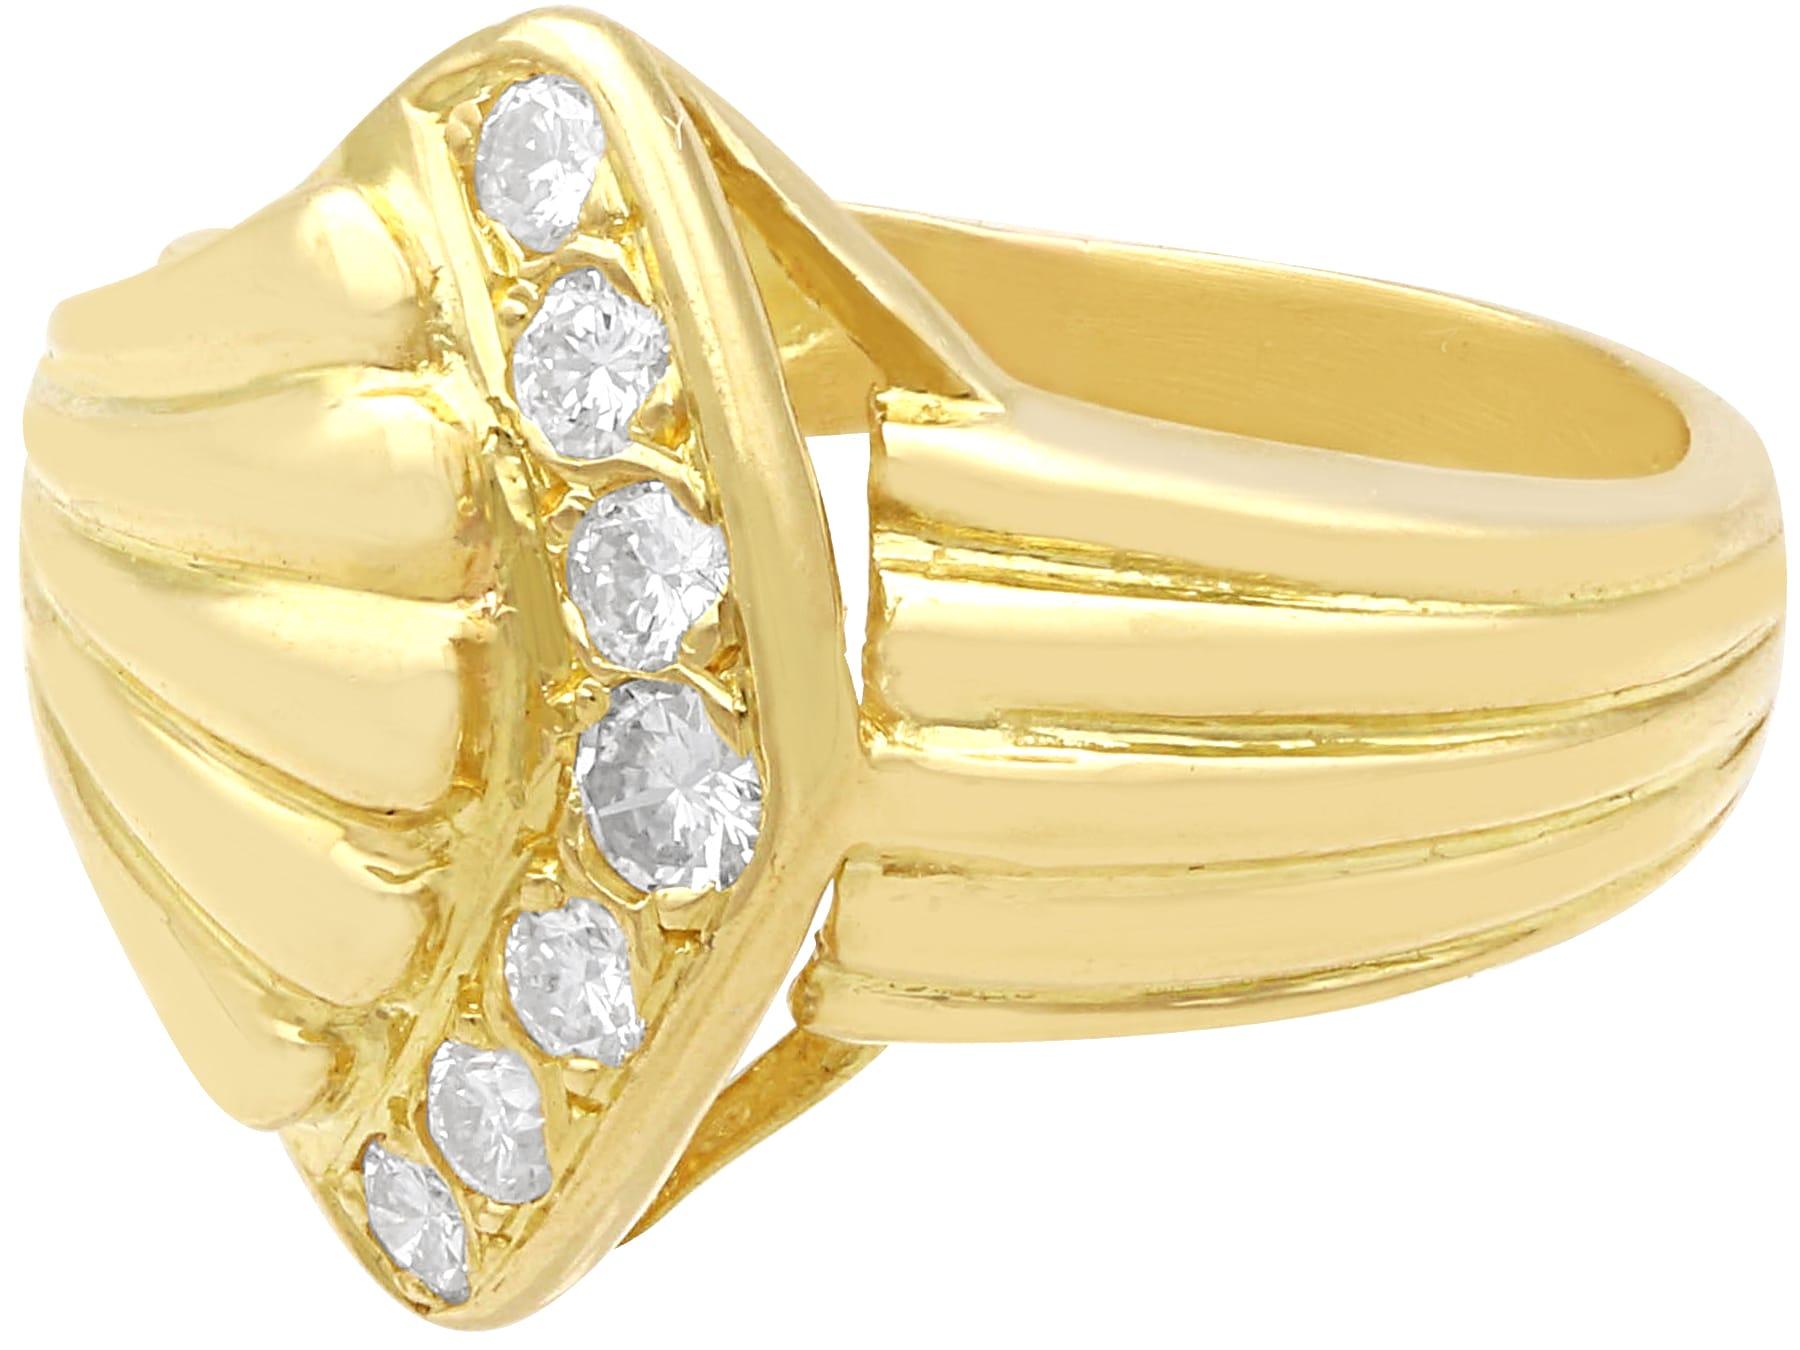 Art Deco 1950s Vintage 0.18 Carat Diamond and 18k Yellow Gold Dress Ring For Sale